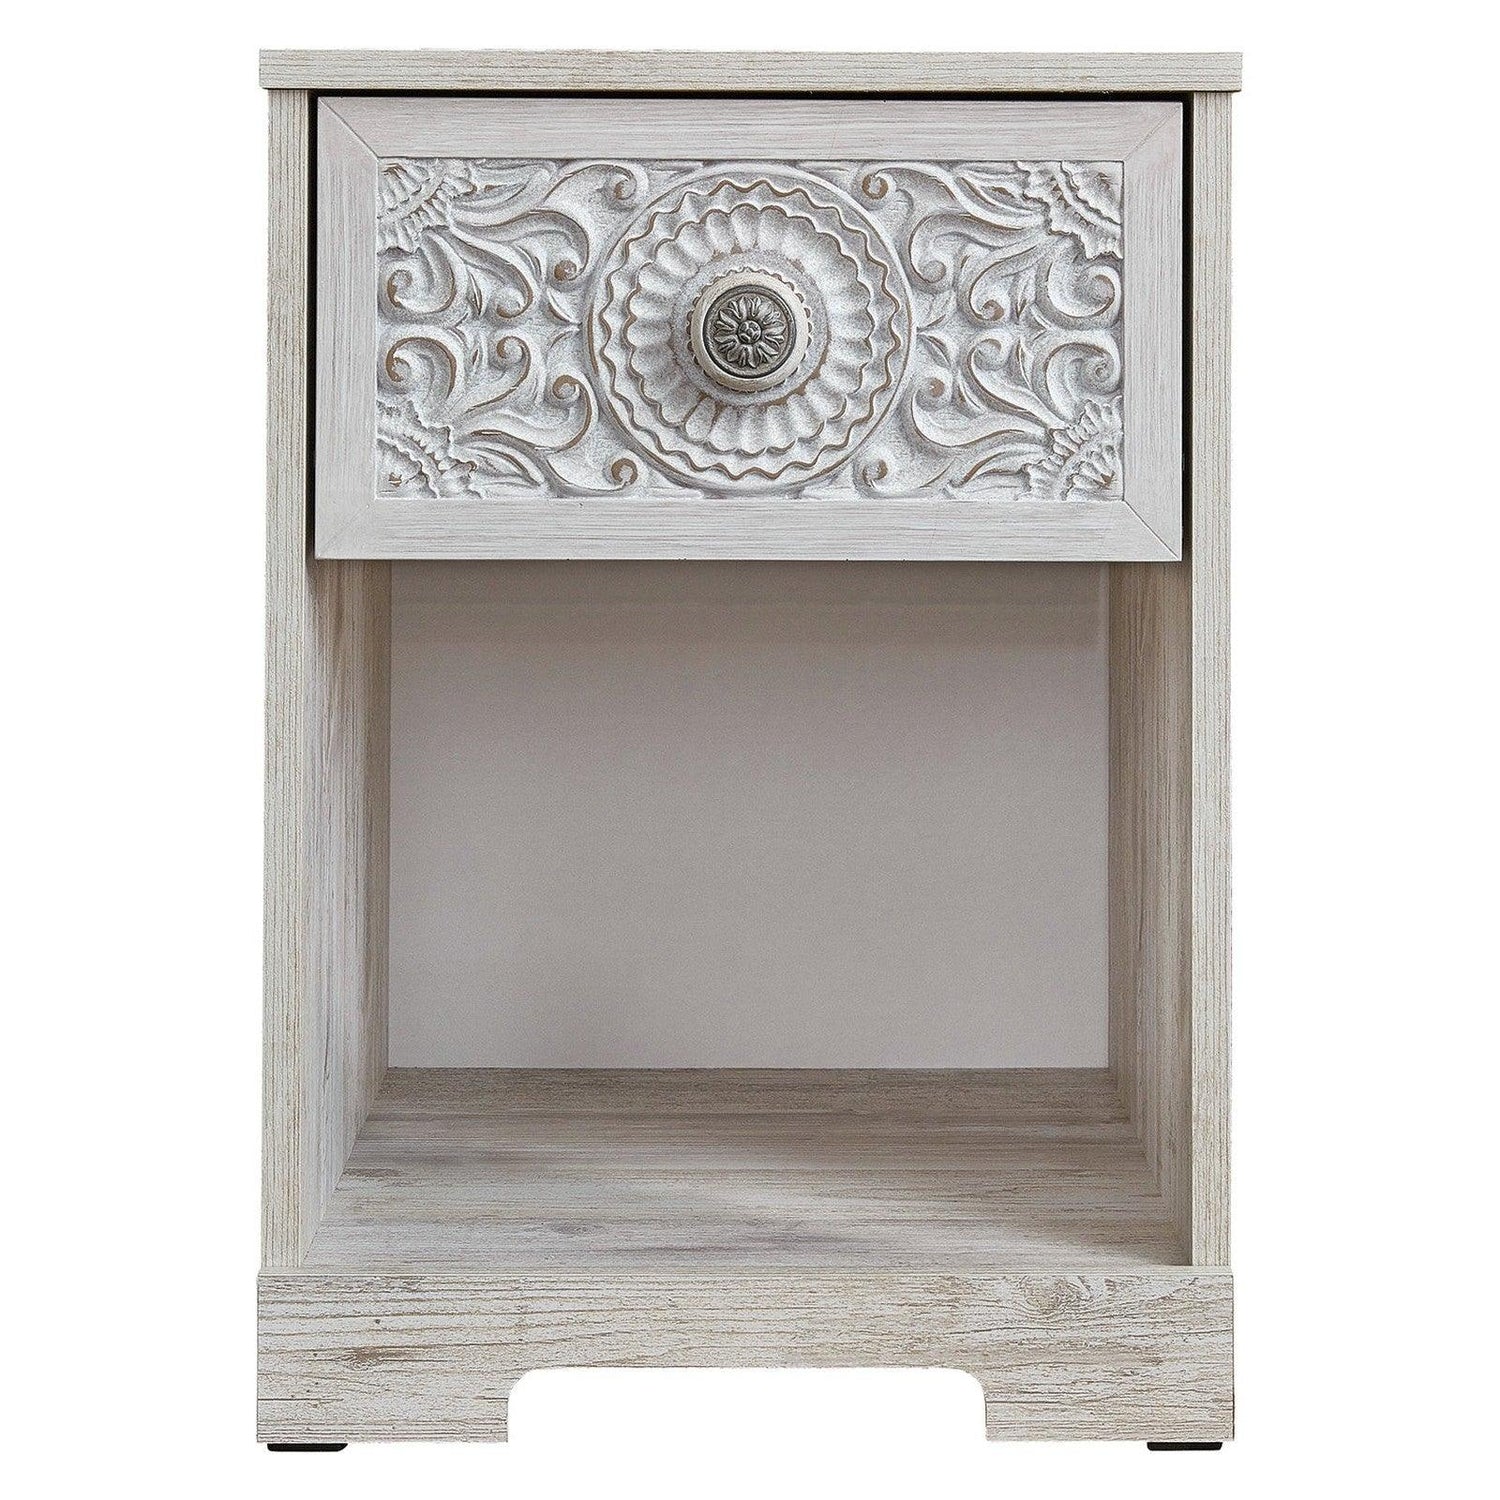 Paxberry Nightstand Ash-EB1811-291